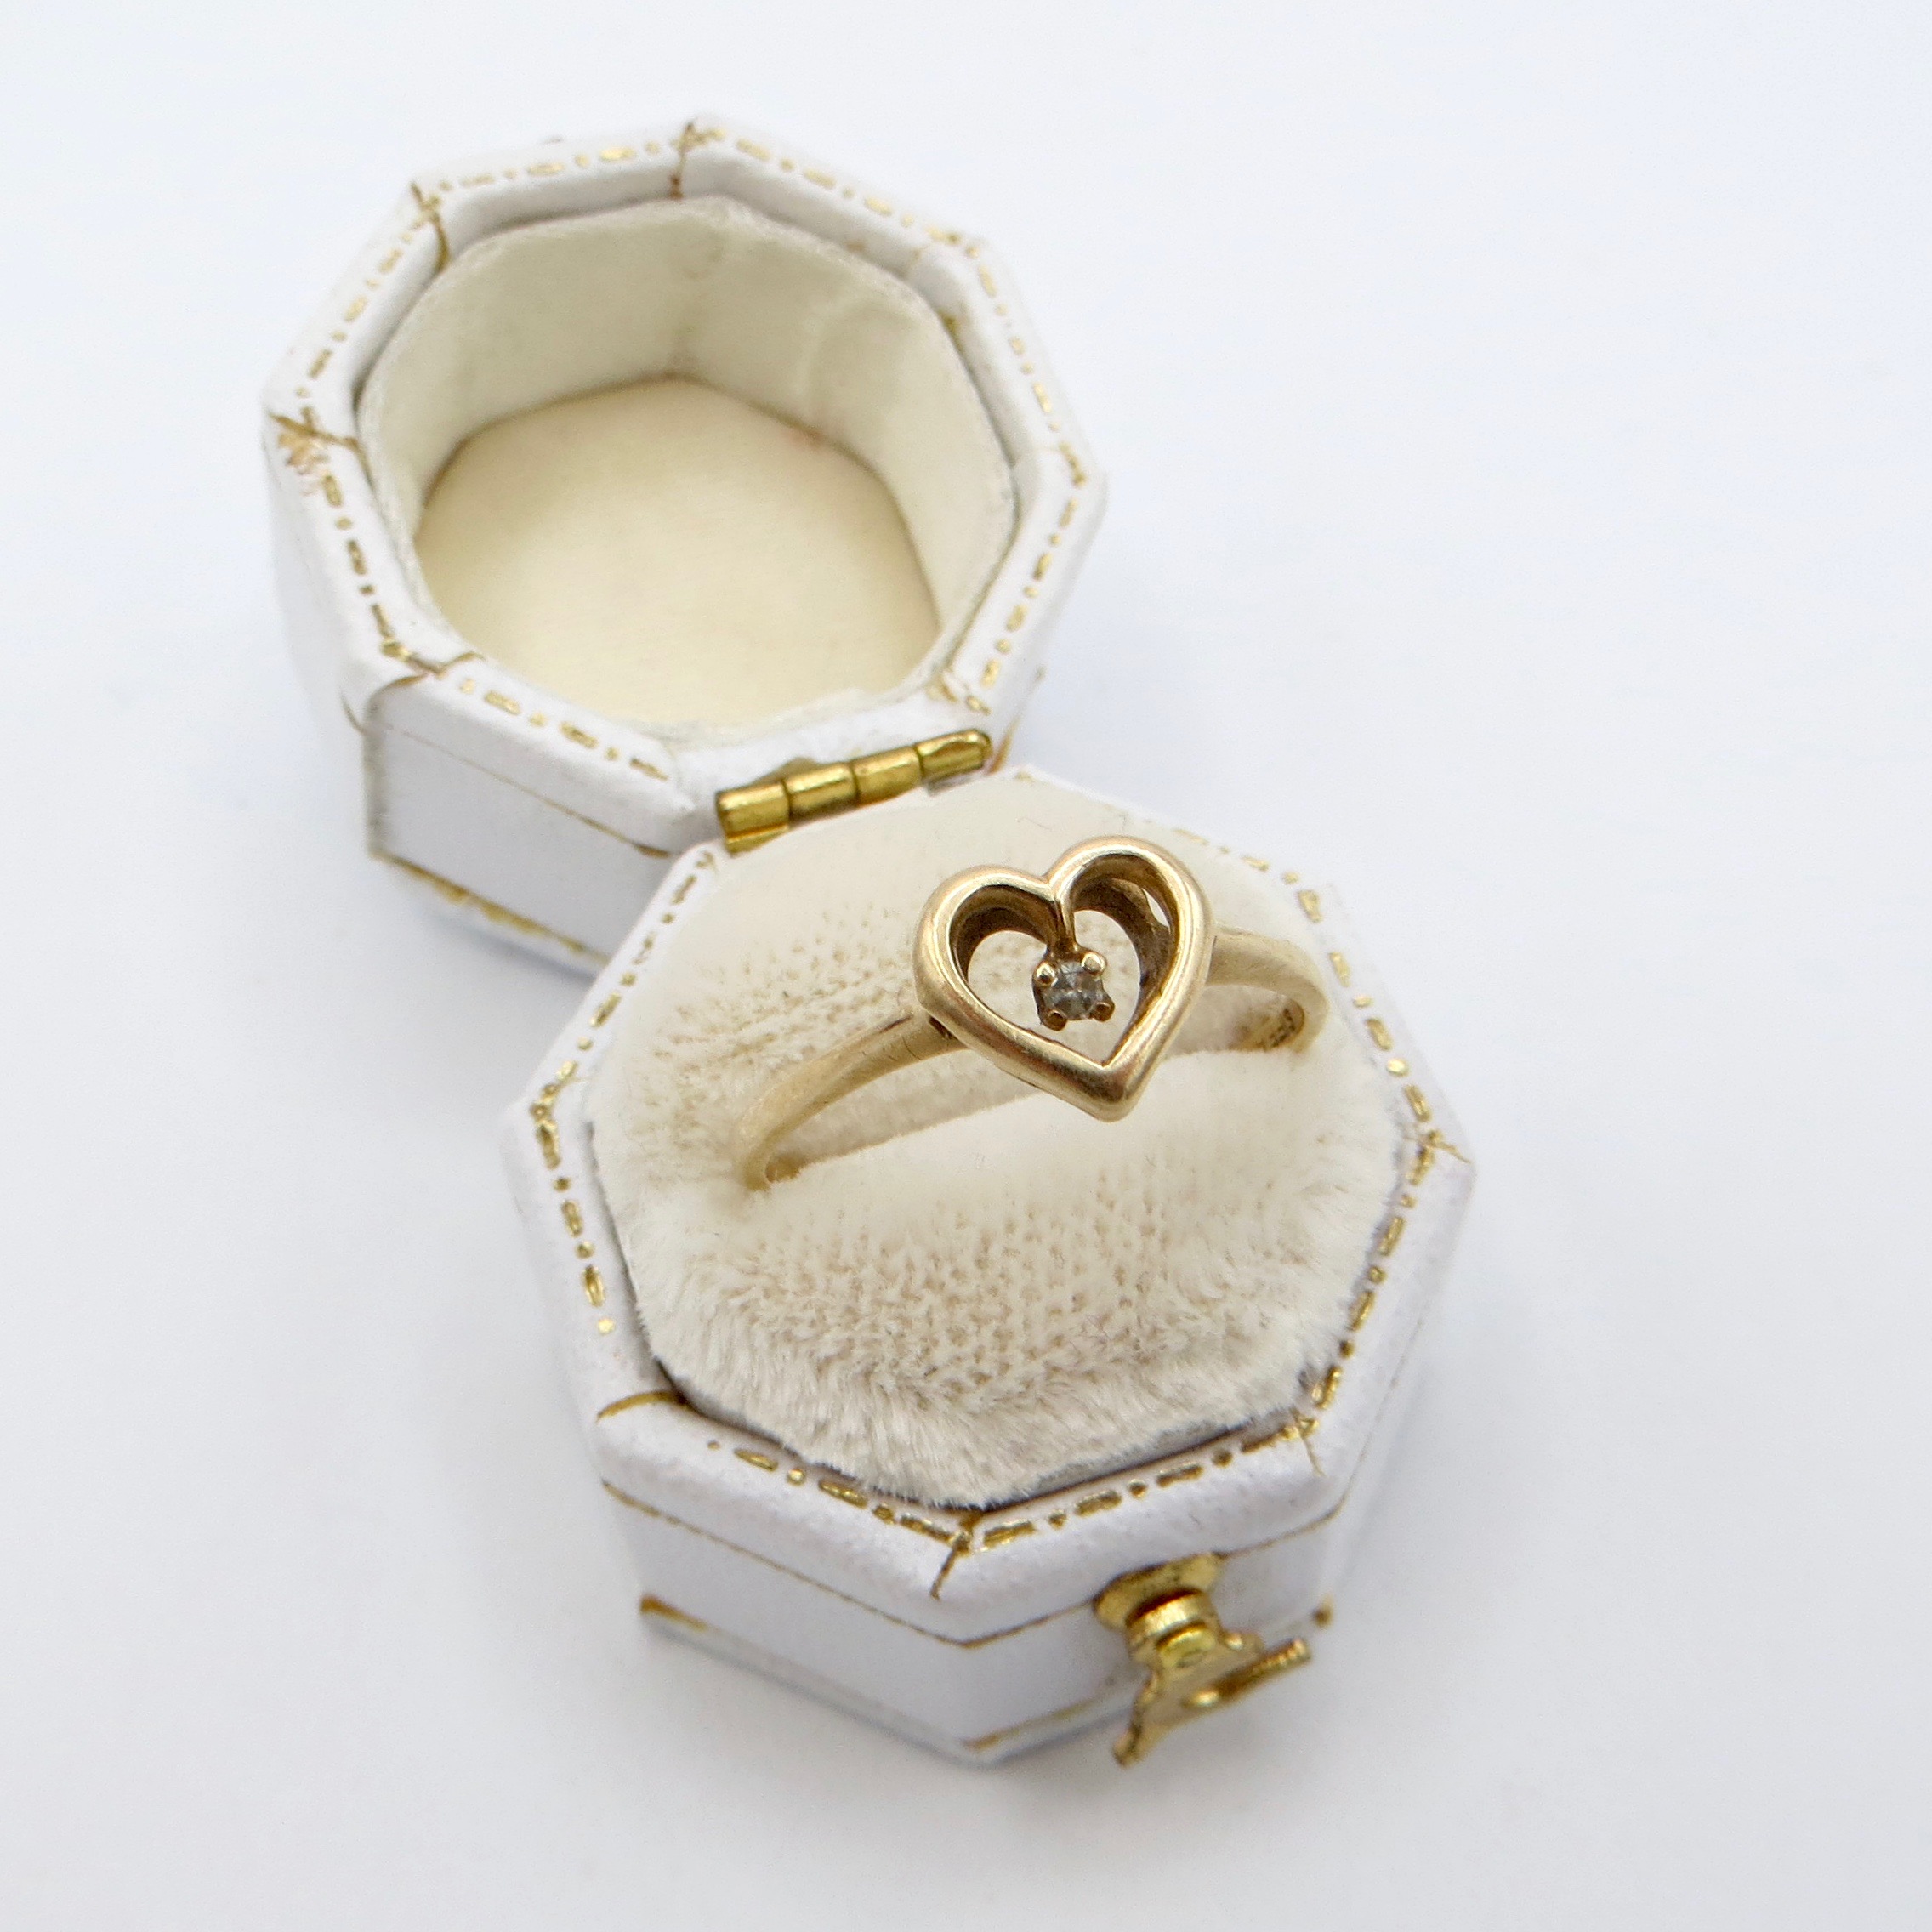 10kt Gold and Diamond Heart Ring